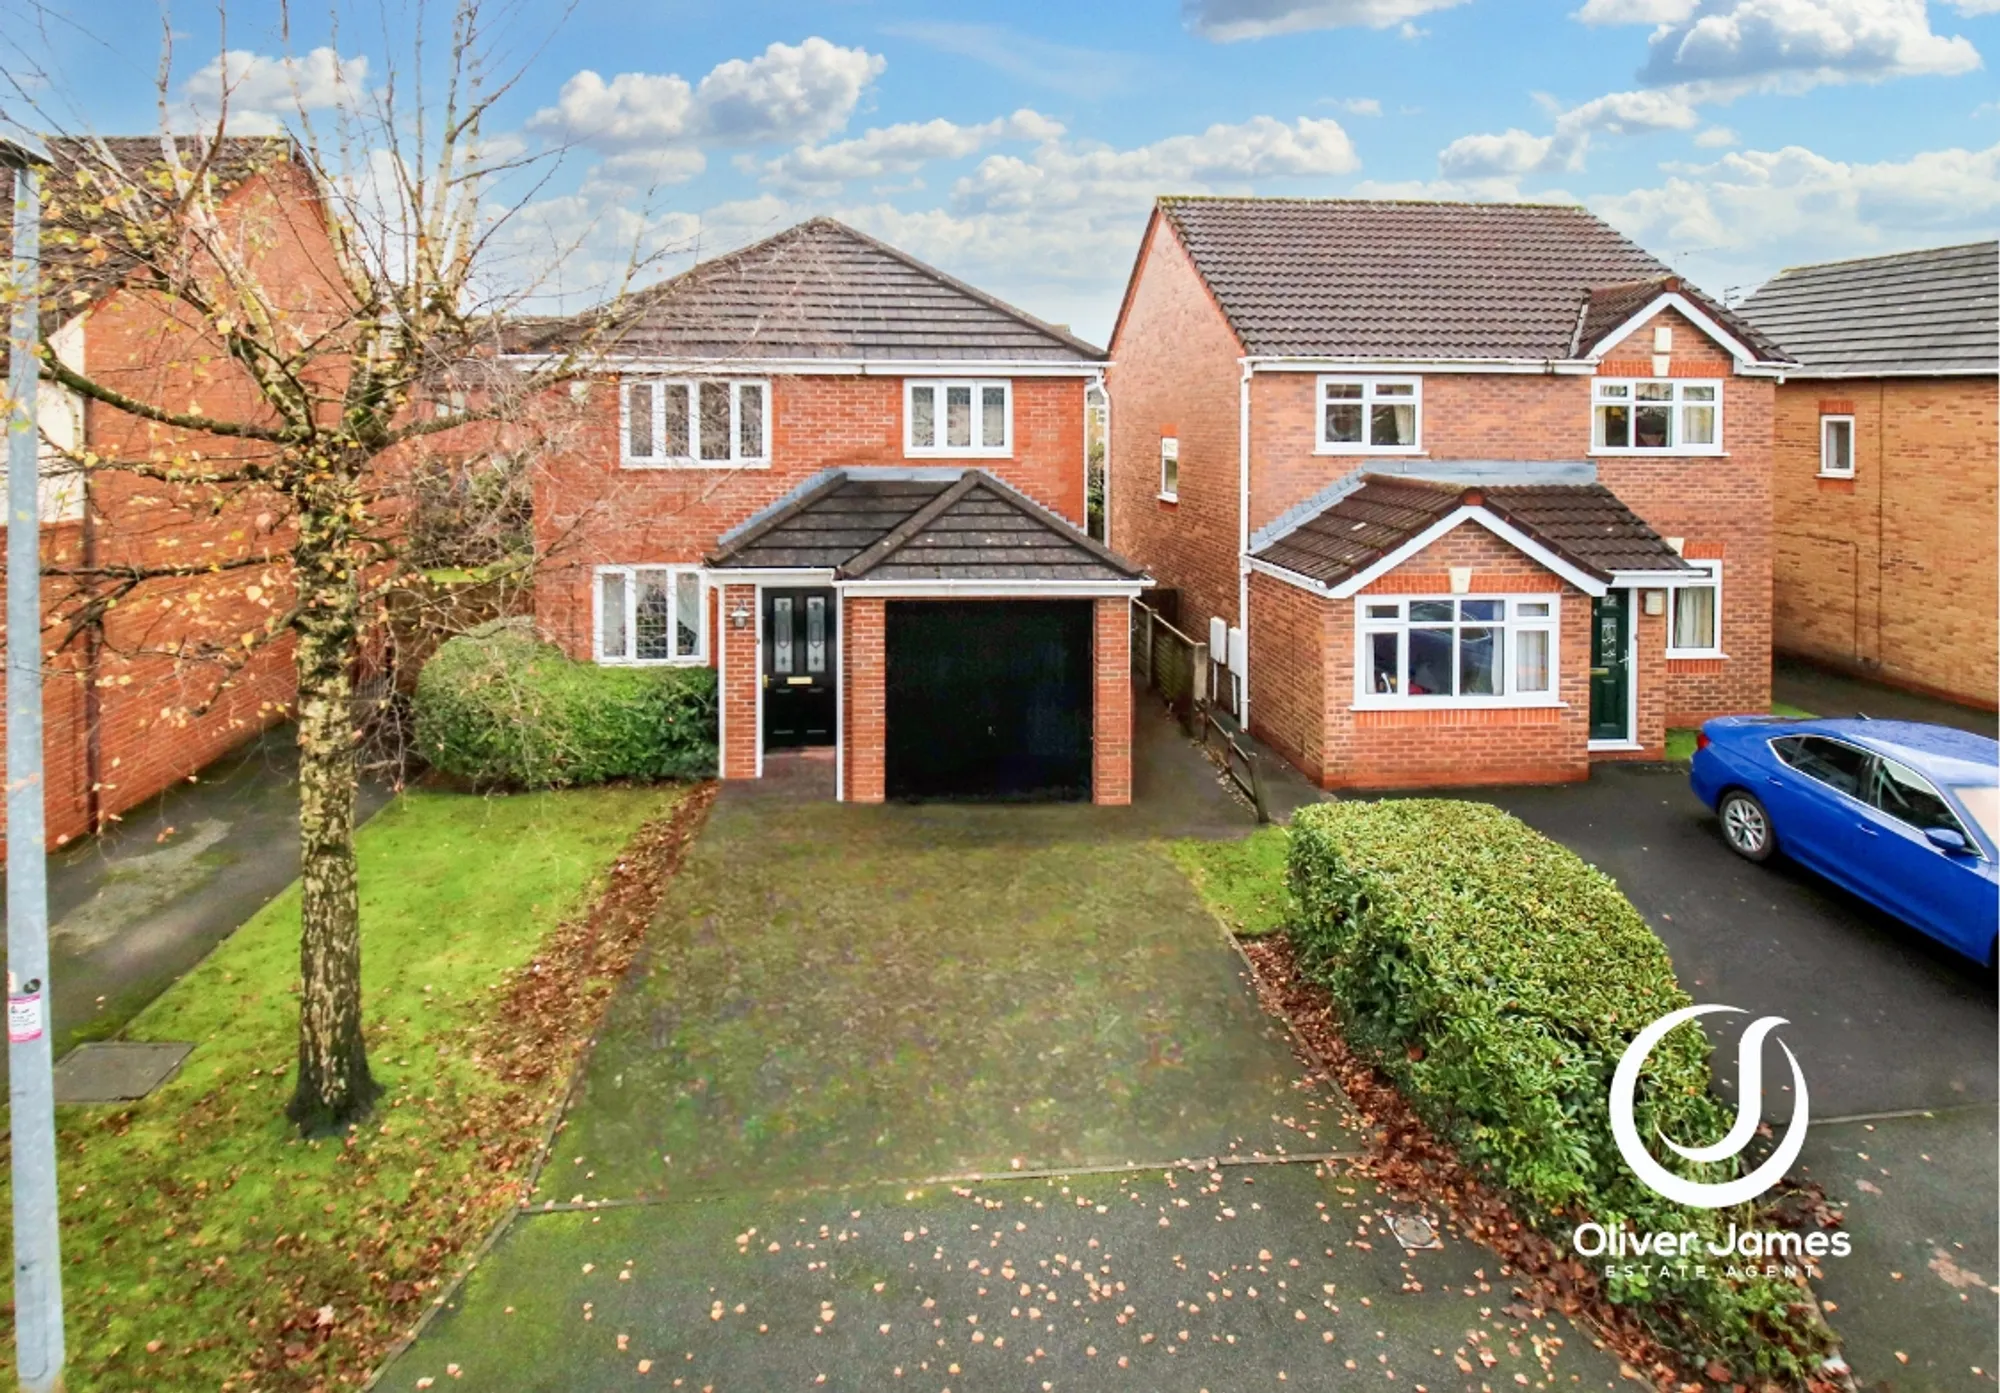 3 bed detached house for sale in Grazing Drive, Manchester - Property Image 1